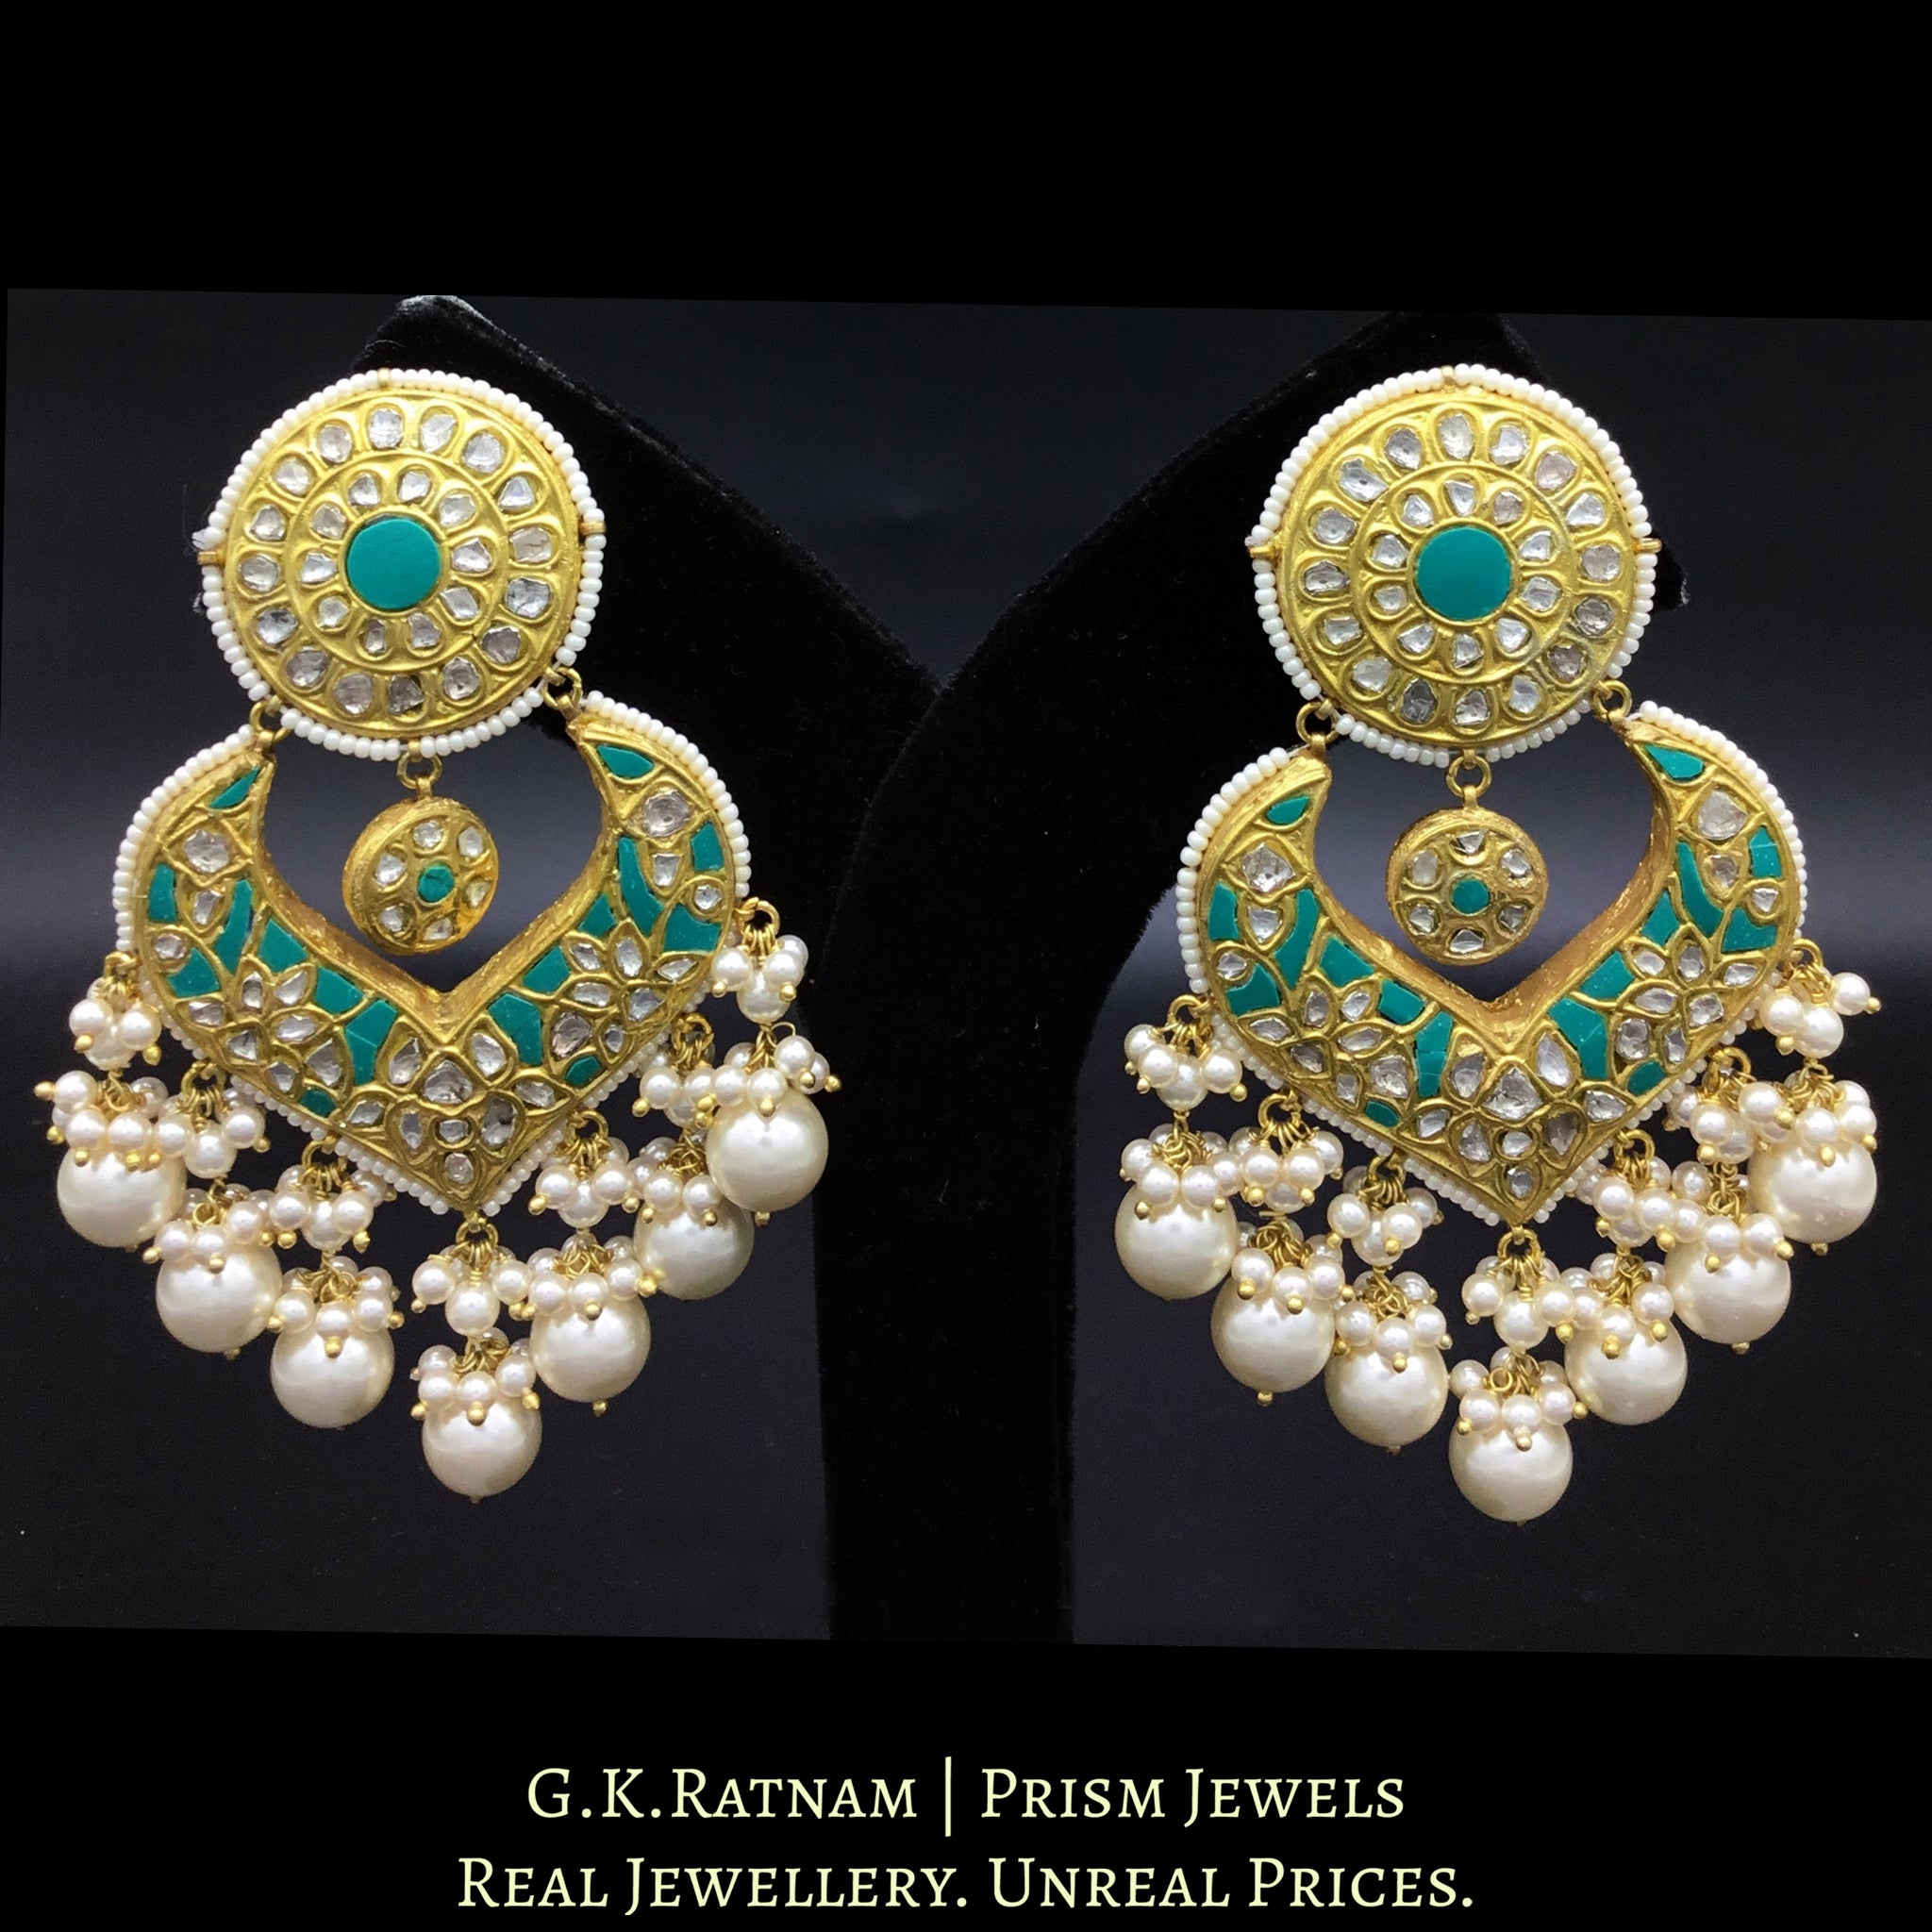 23k Gold and Diamond Polki Chand Bali Earring Pair with V-shaped firoza chand